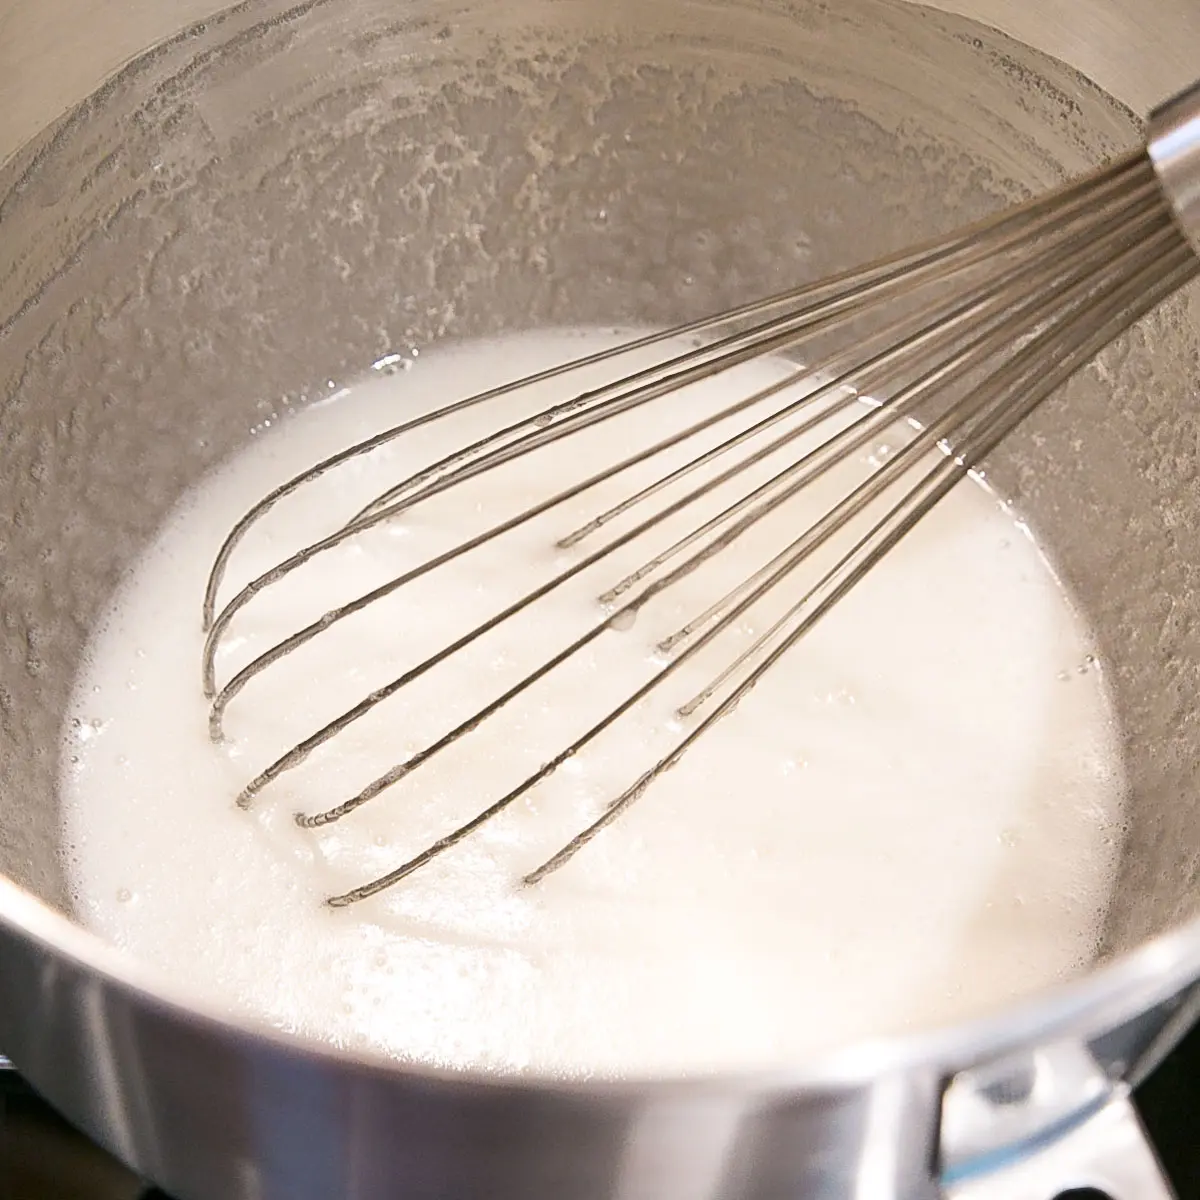 Egg and sugar mixture after cooking.